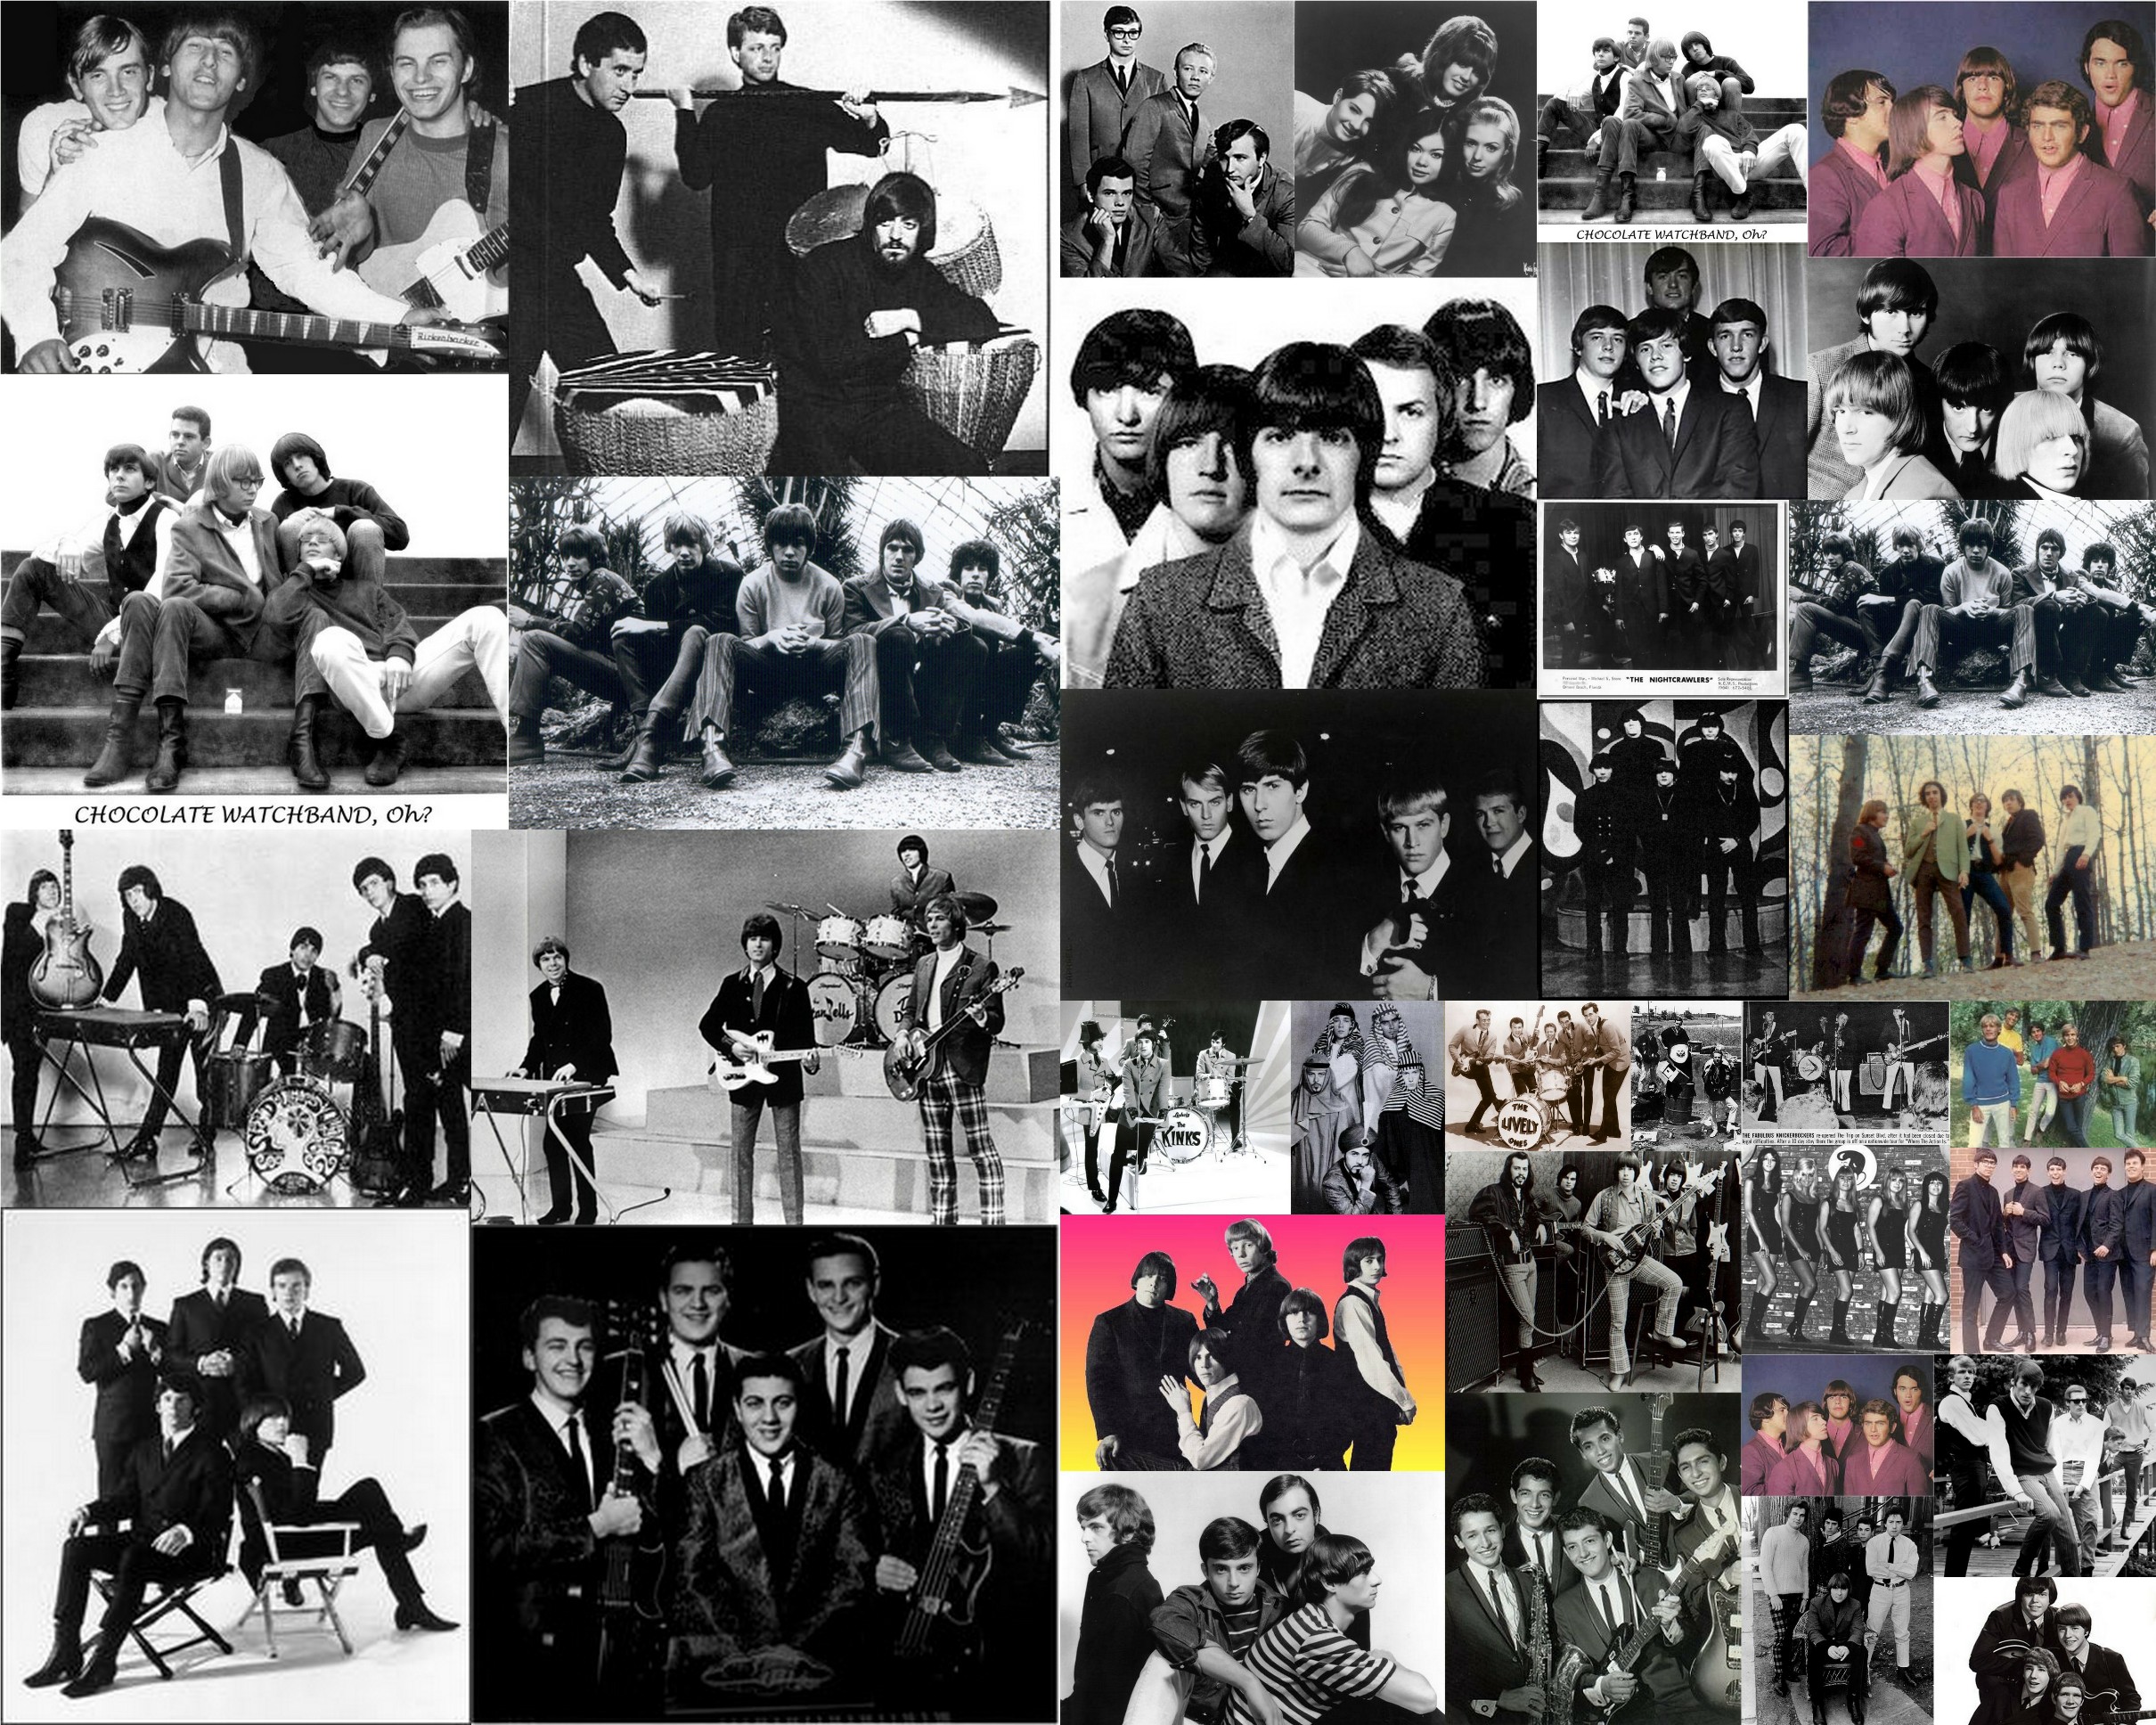 Classic Rock Bands Of The 60s - 60s Rock Music - HD Wallpaper 